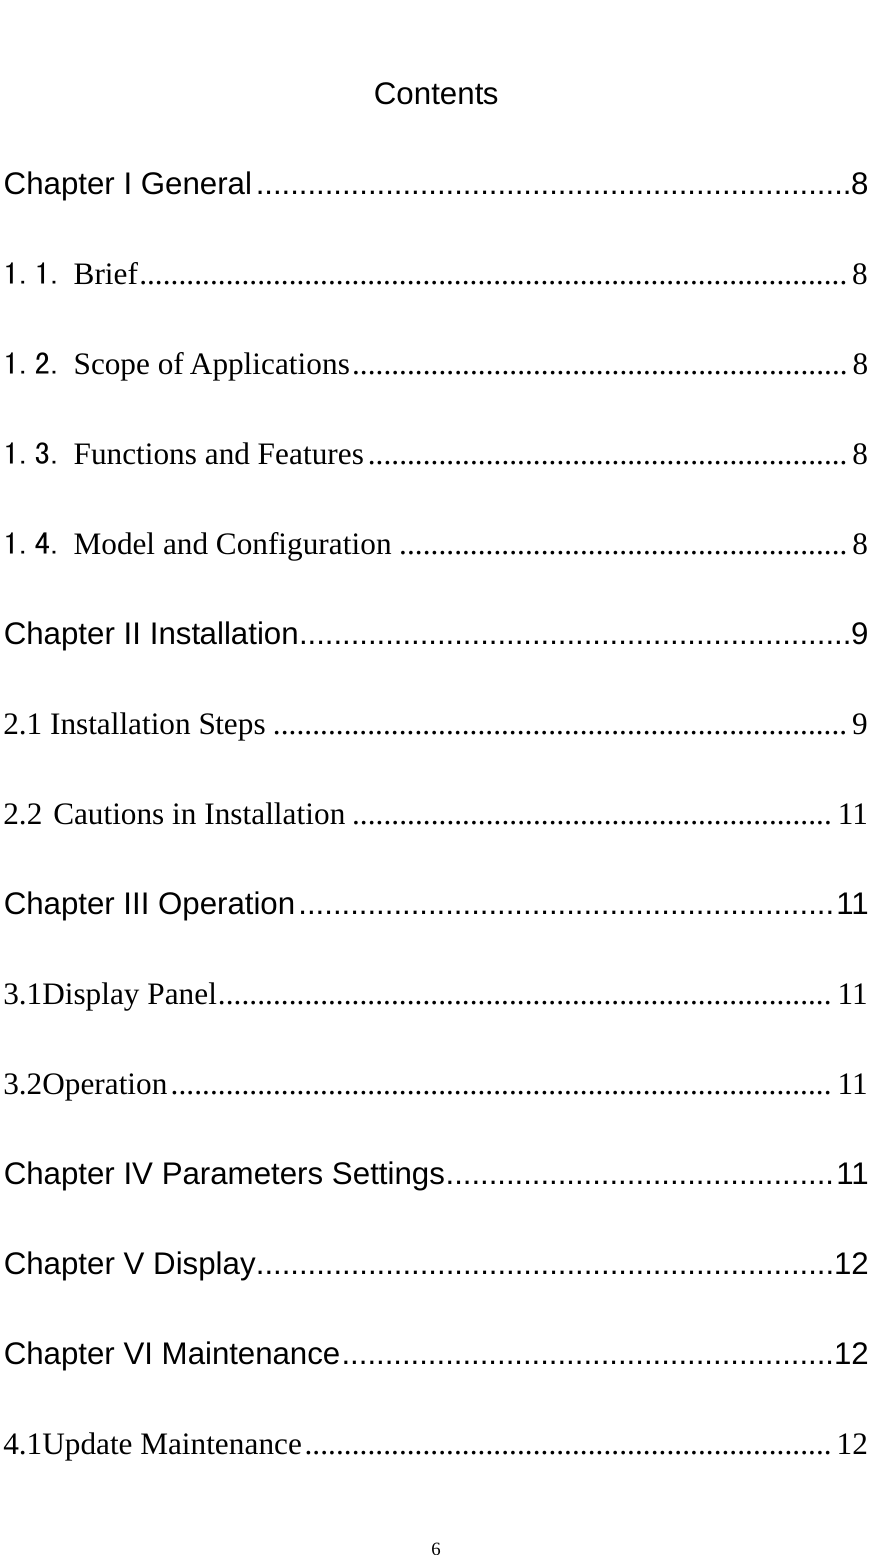   6Contents Chapter I General ..................................................................... 8 1.1. Brief .......................................................................................... 8 1.2. Scope of Applications ............................................................... 8 1.3. Functions and Features ............................................................. 8 1.4. Model and Configuration ......................................................... 8 Chapter II Installation ................................................................ 9 2.1 Installation Steps ......................................................................... 9 2.2 Cautions in Installation ............................................................. 11 Chapter III Operation .............................................................. 11 3.1Display Panel ..............................................................................  11 3.2Operation ....................................................................................  11 Chapter IV Parameters Settings ............................................. 11 Chapter V Display ...................................................................12 Chapter VI Maintenance .........................................................12 4.1Update Maintenance ...................................................................  12 